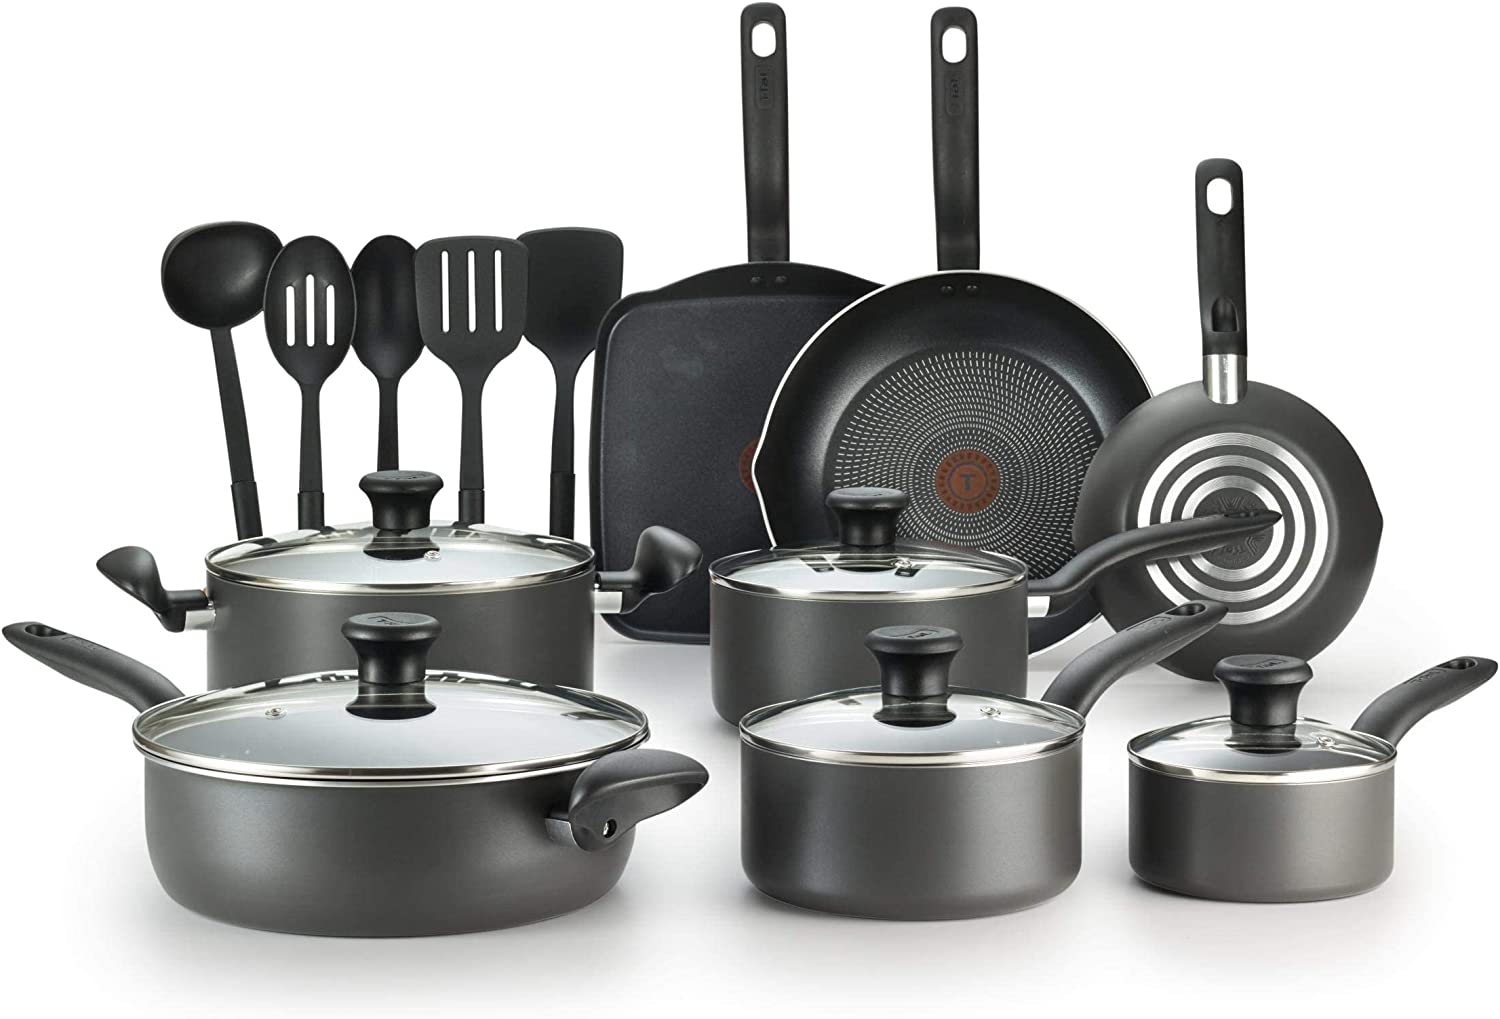 T-fal Initiatives Ceramic Nonstick Fry Pan 12 Inch Oven Safe 350F Pots and  Pans Black